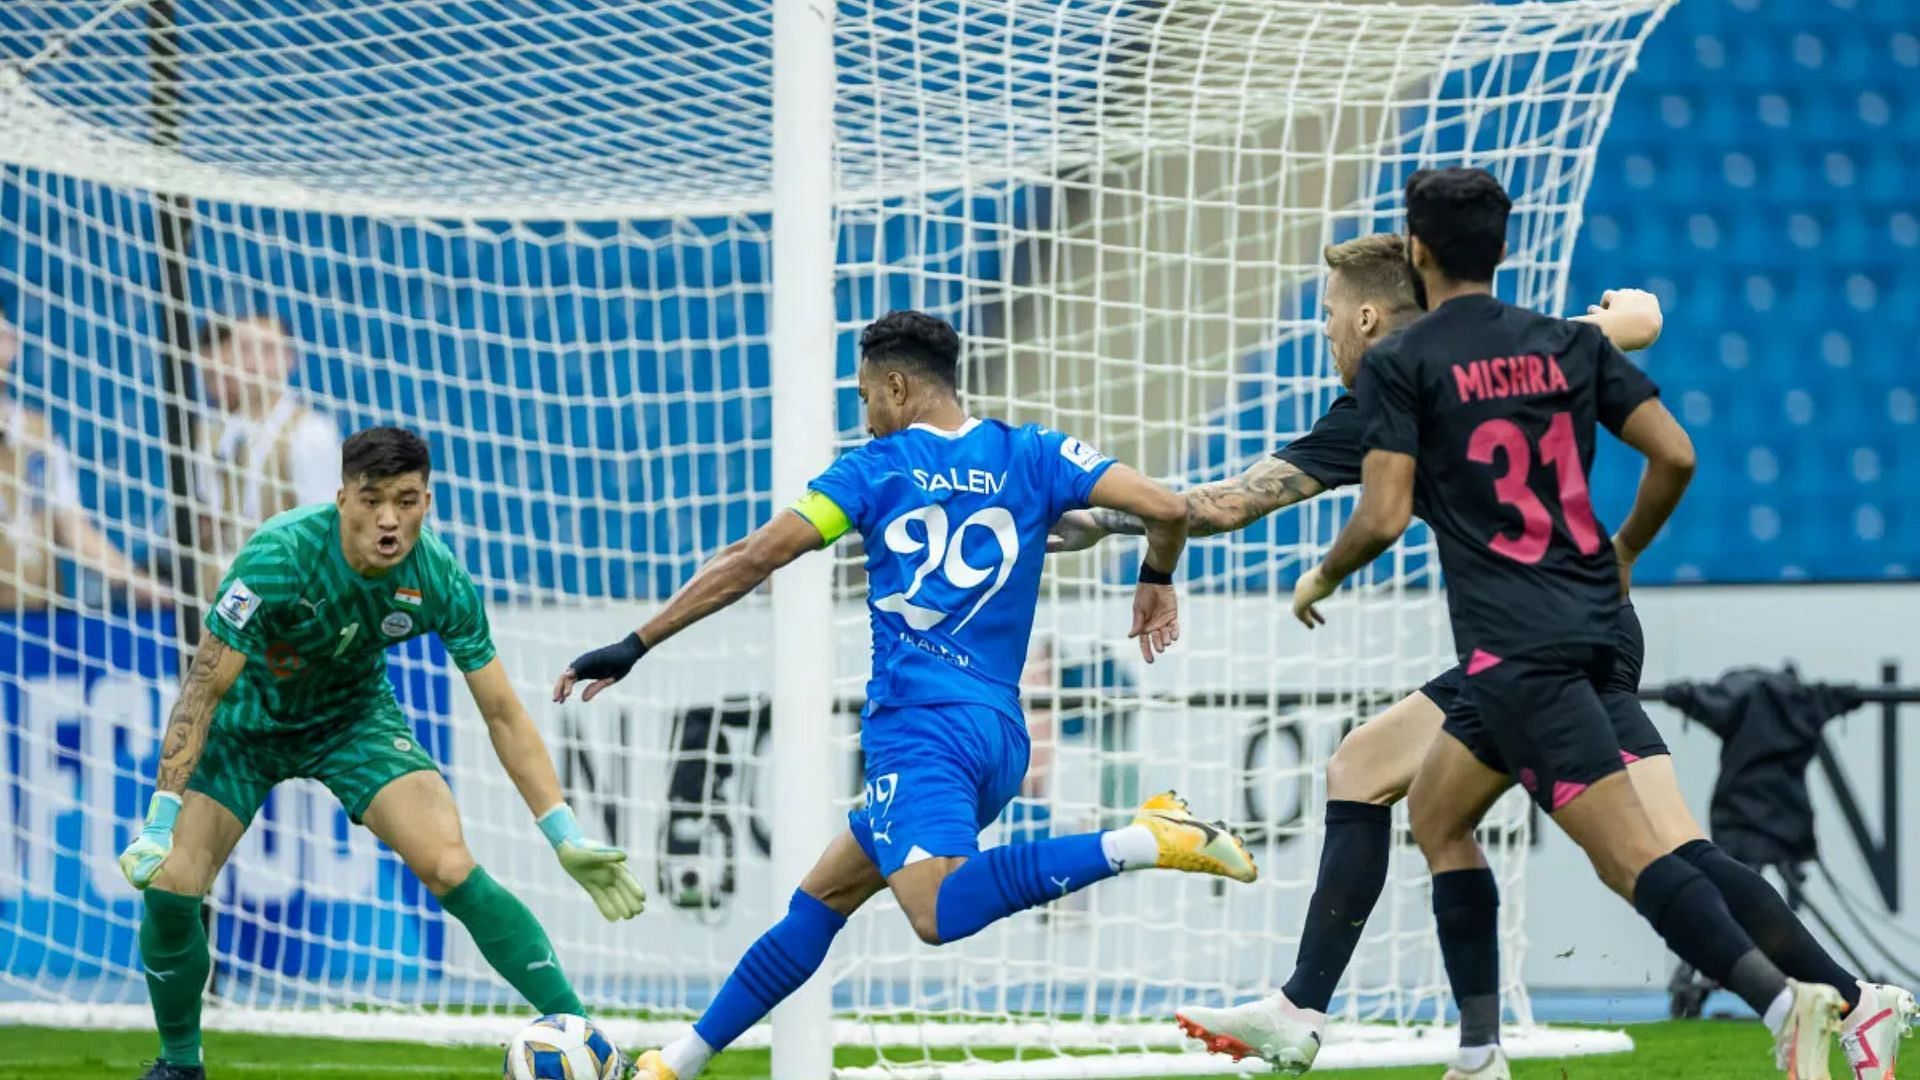 Mumbai City FC was completely done in by Saudi Pro League side Al Hilal in their AFC Champions League group stage tie.